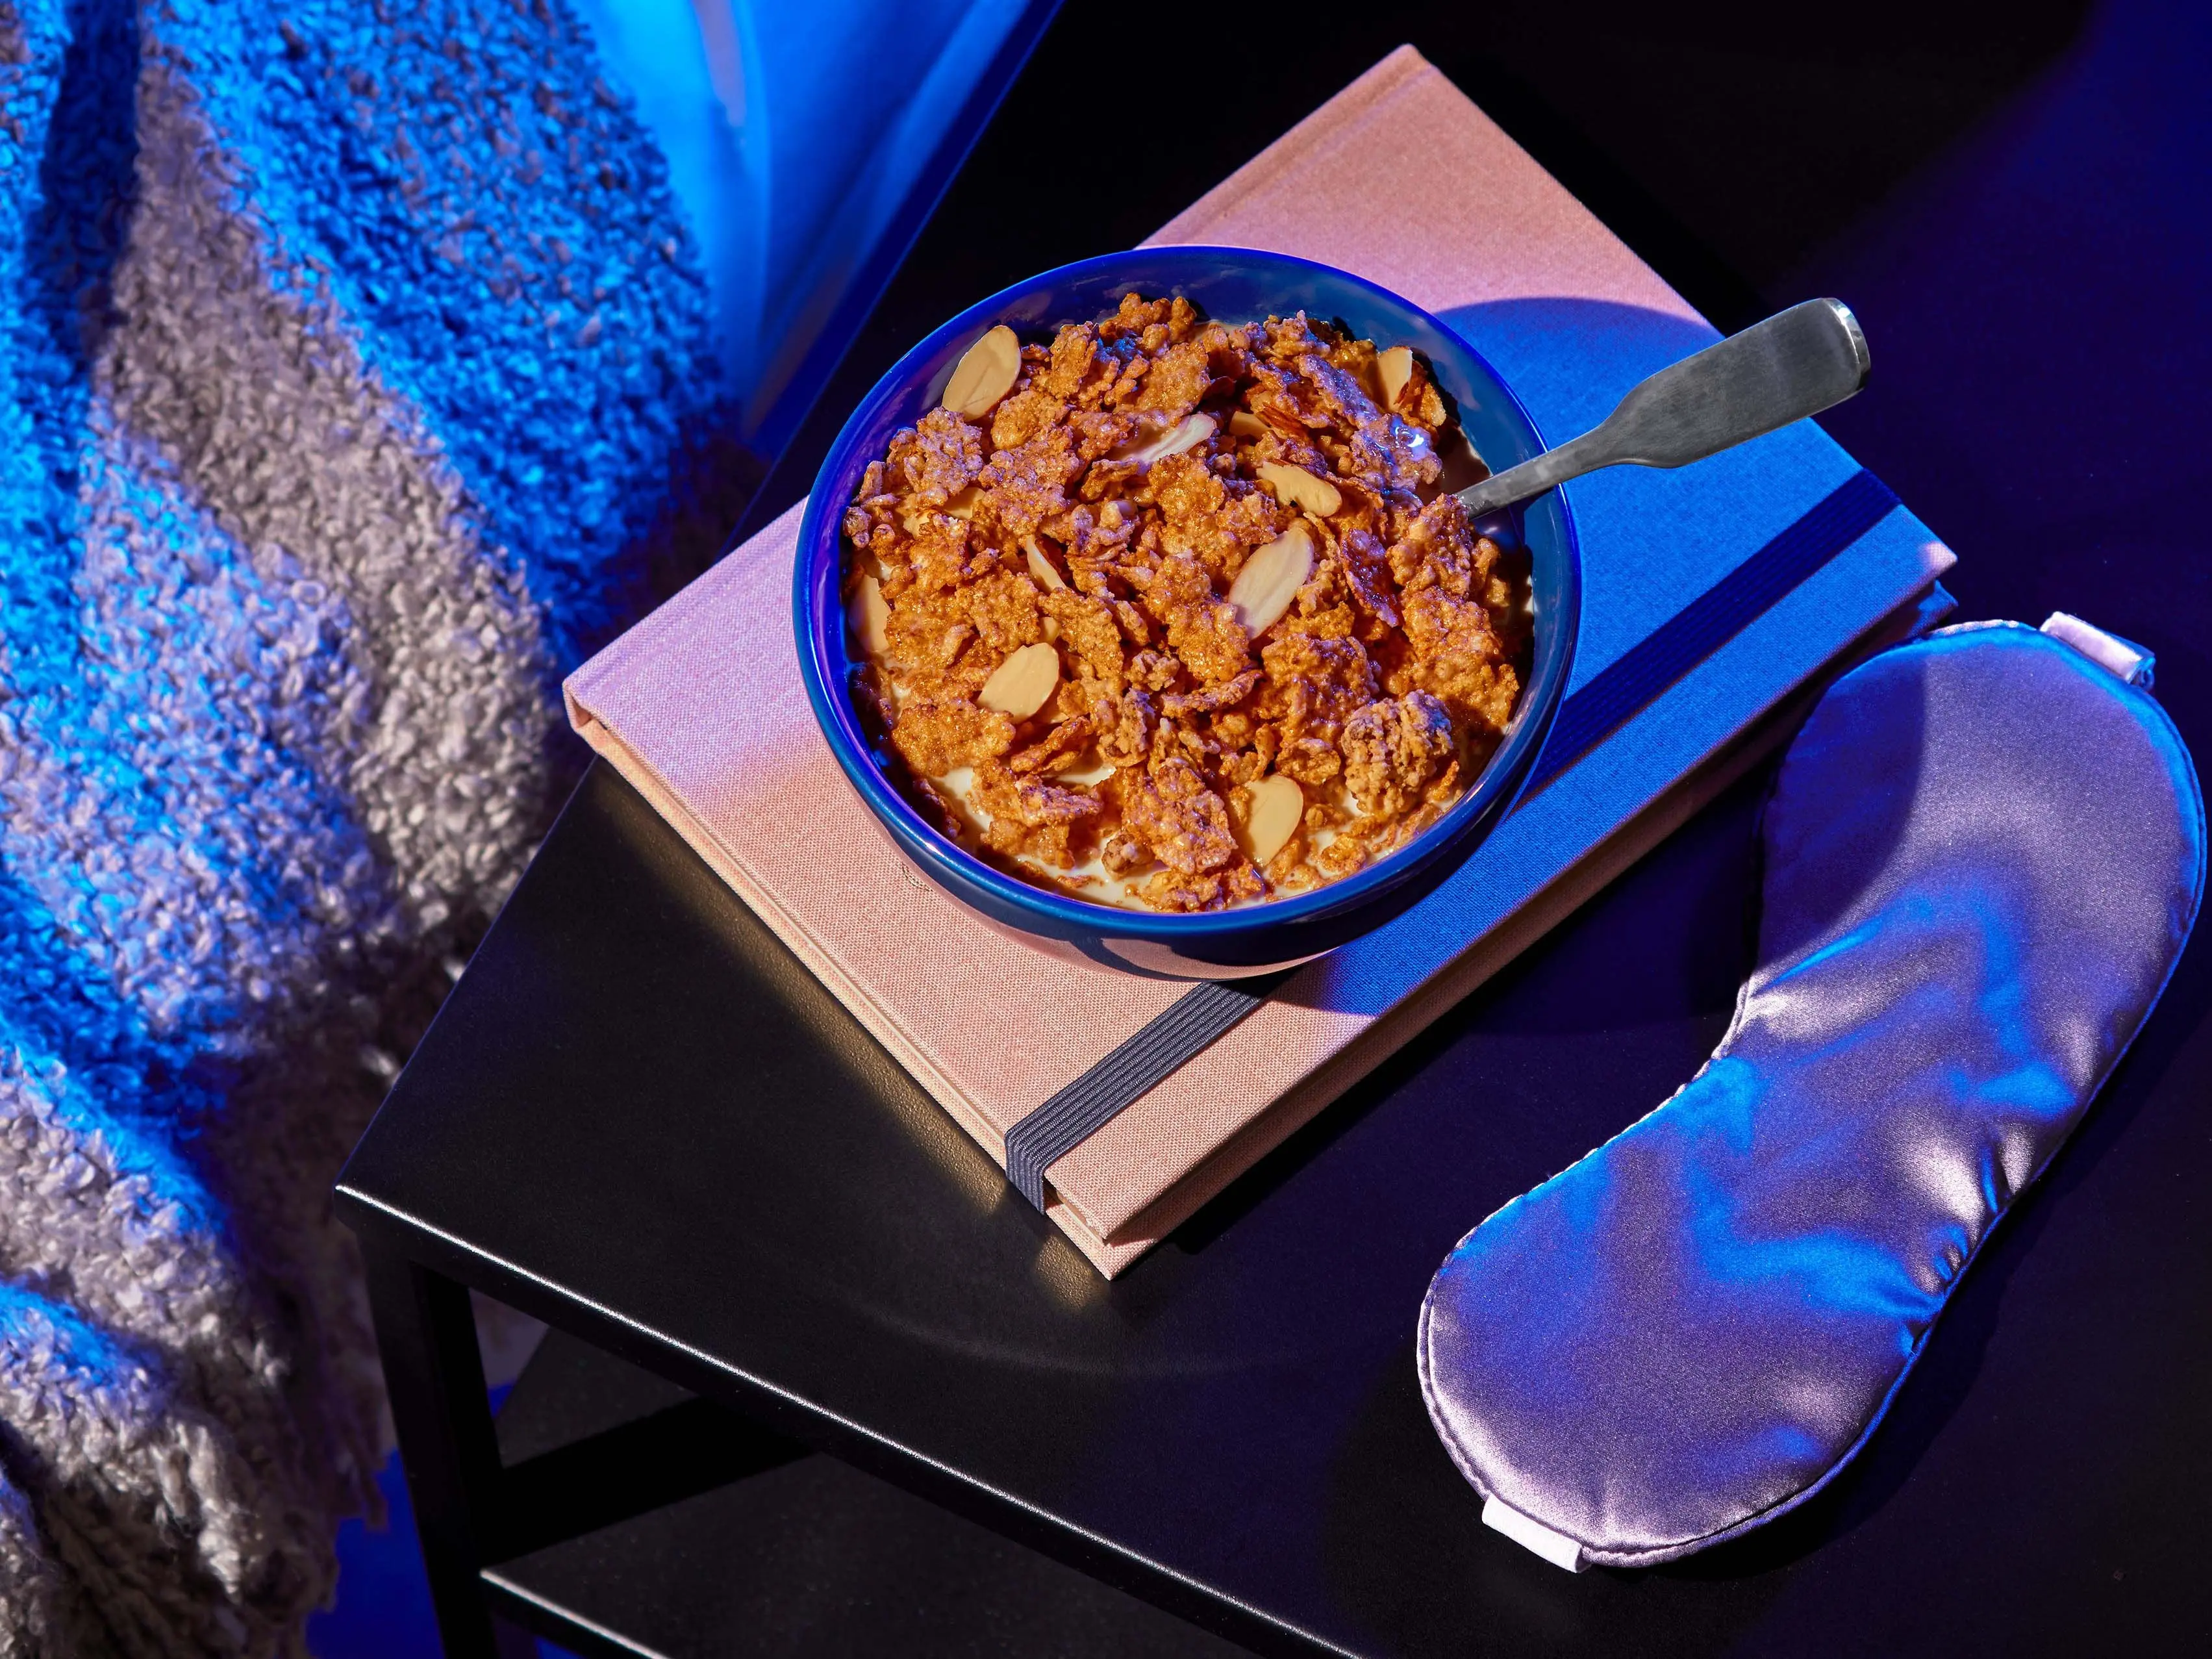 A bowl of sweet dreams cereal with eye covers and a blanket on either side.